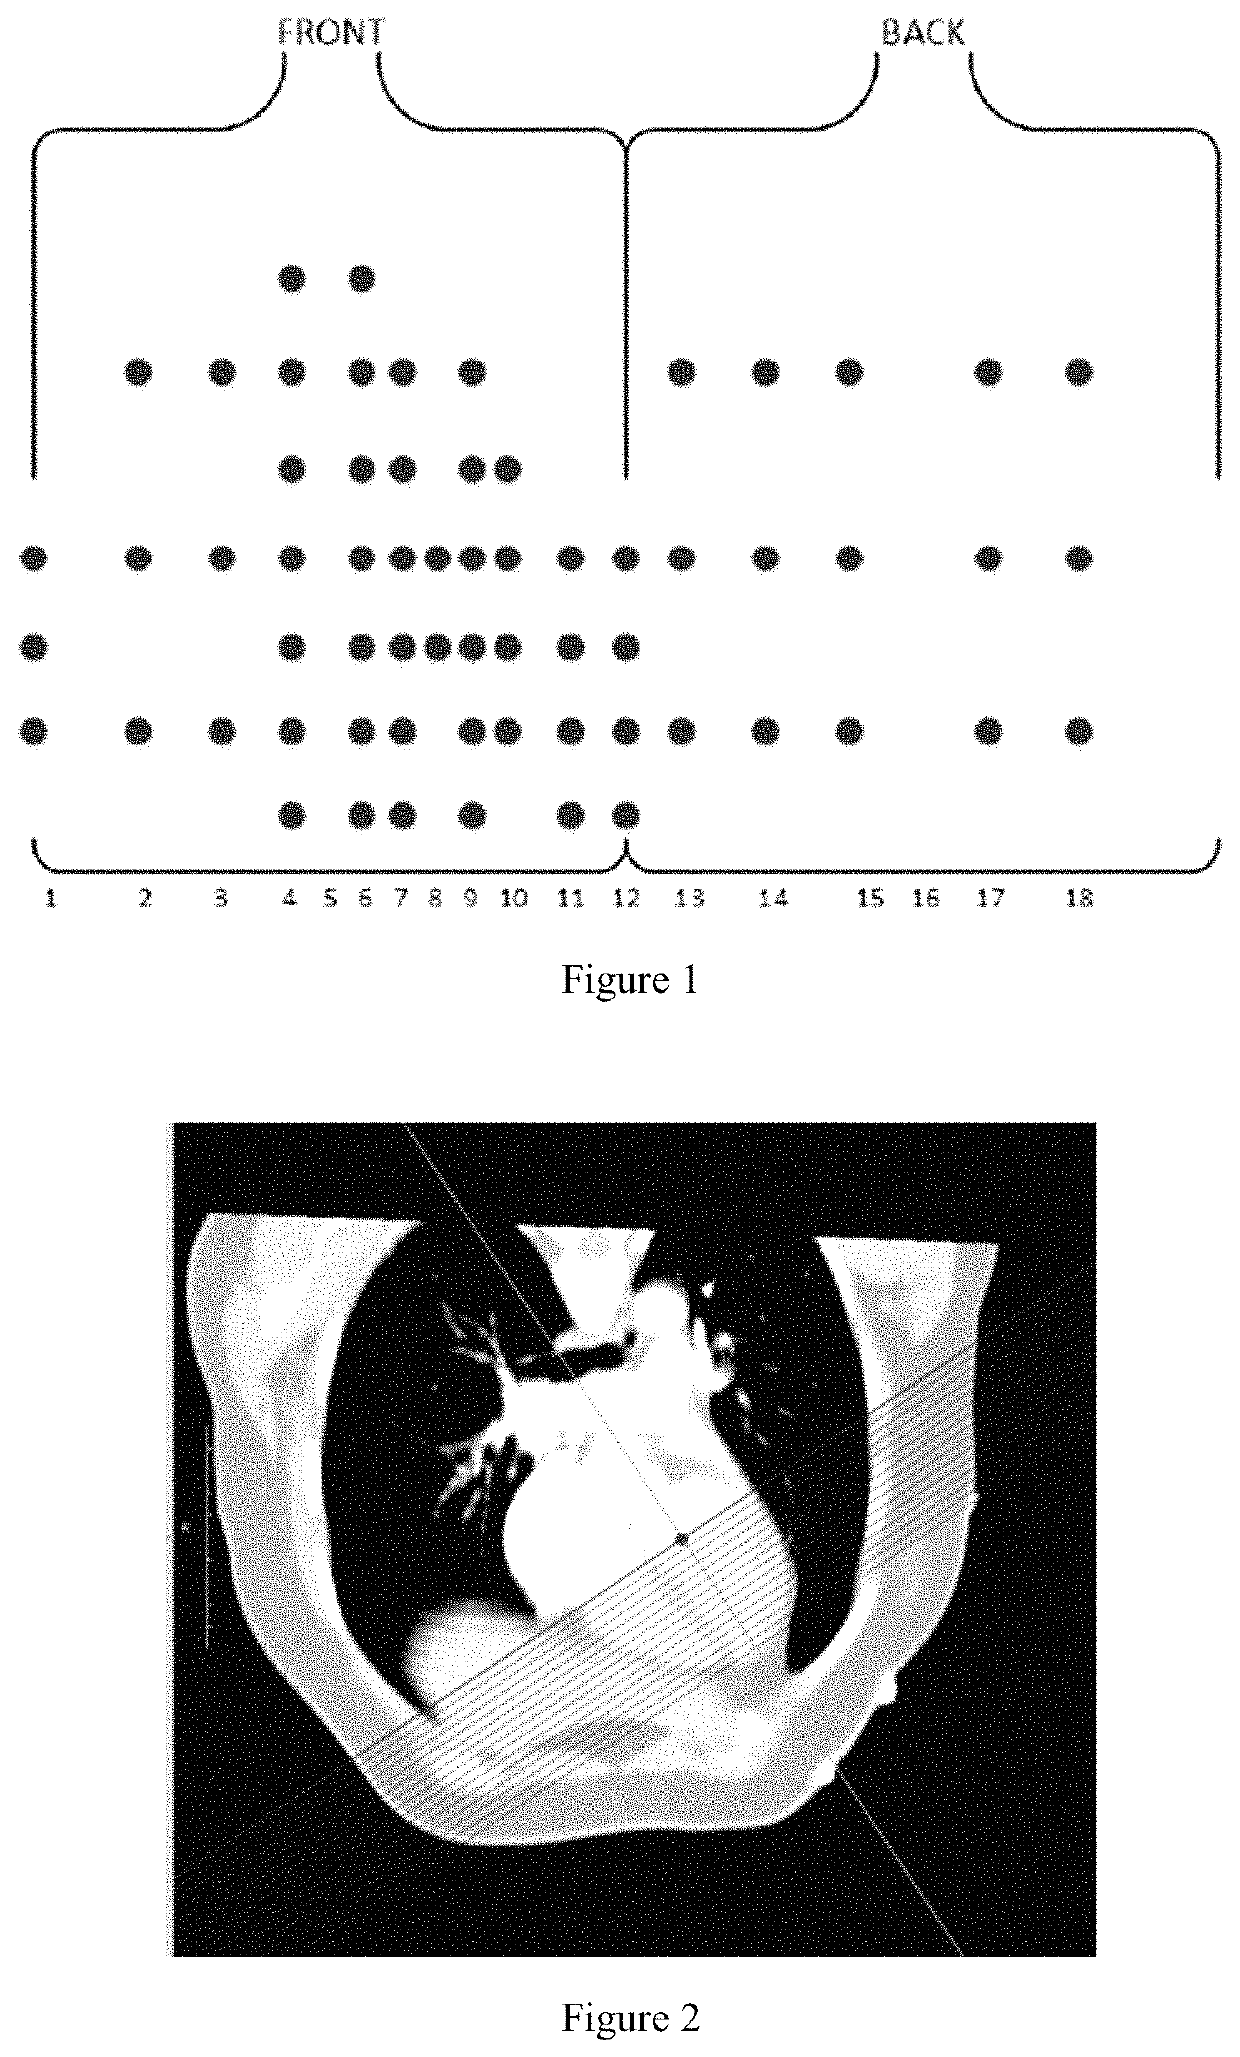 Method for noninvasive imaging of cardiac electrophysiological based on low rank and sparse constraints